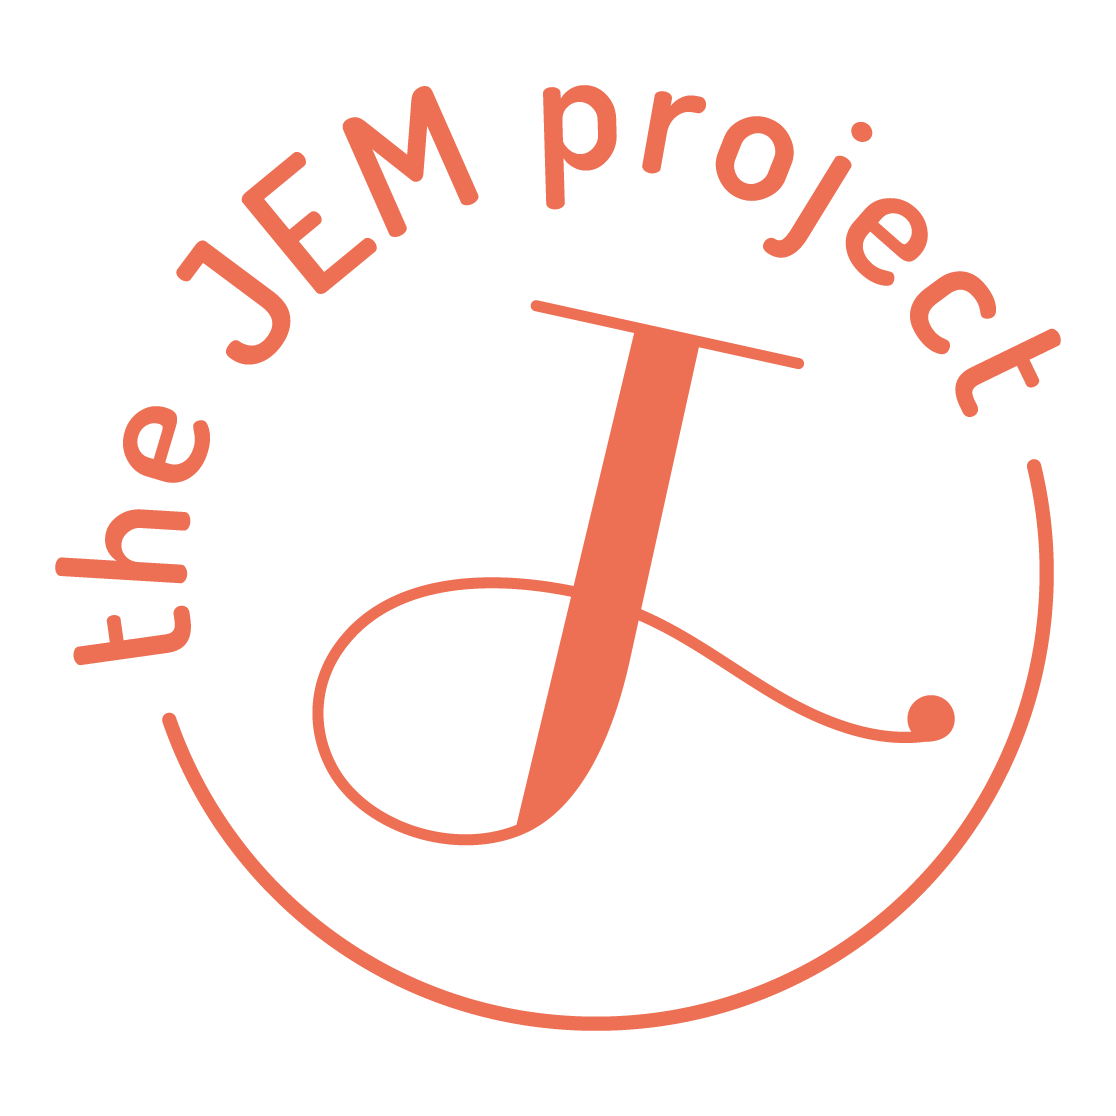 the JEM project